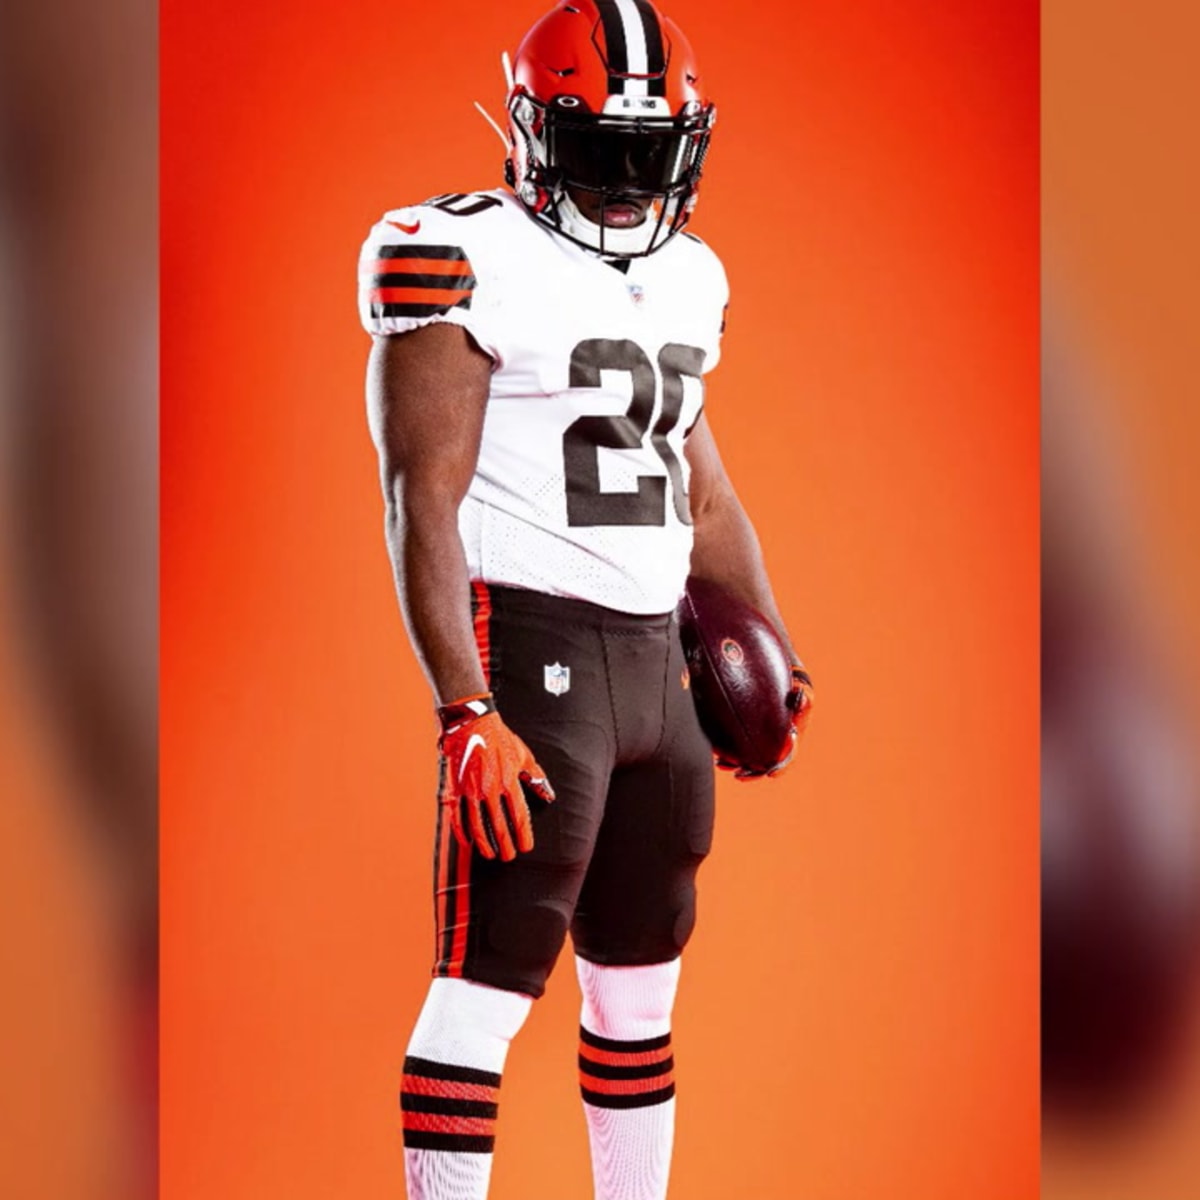 new browns jerseys for sale